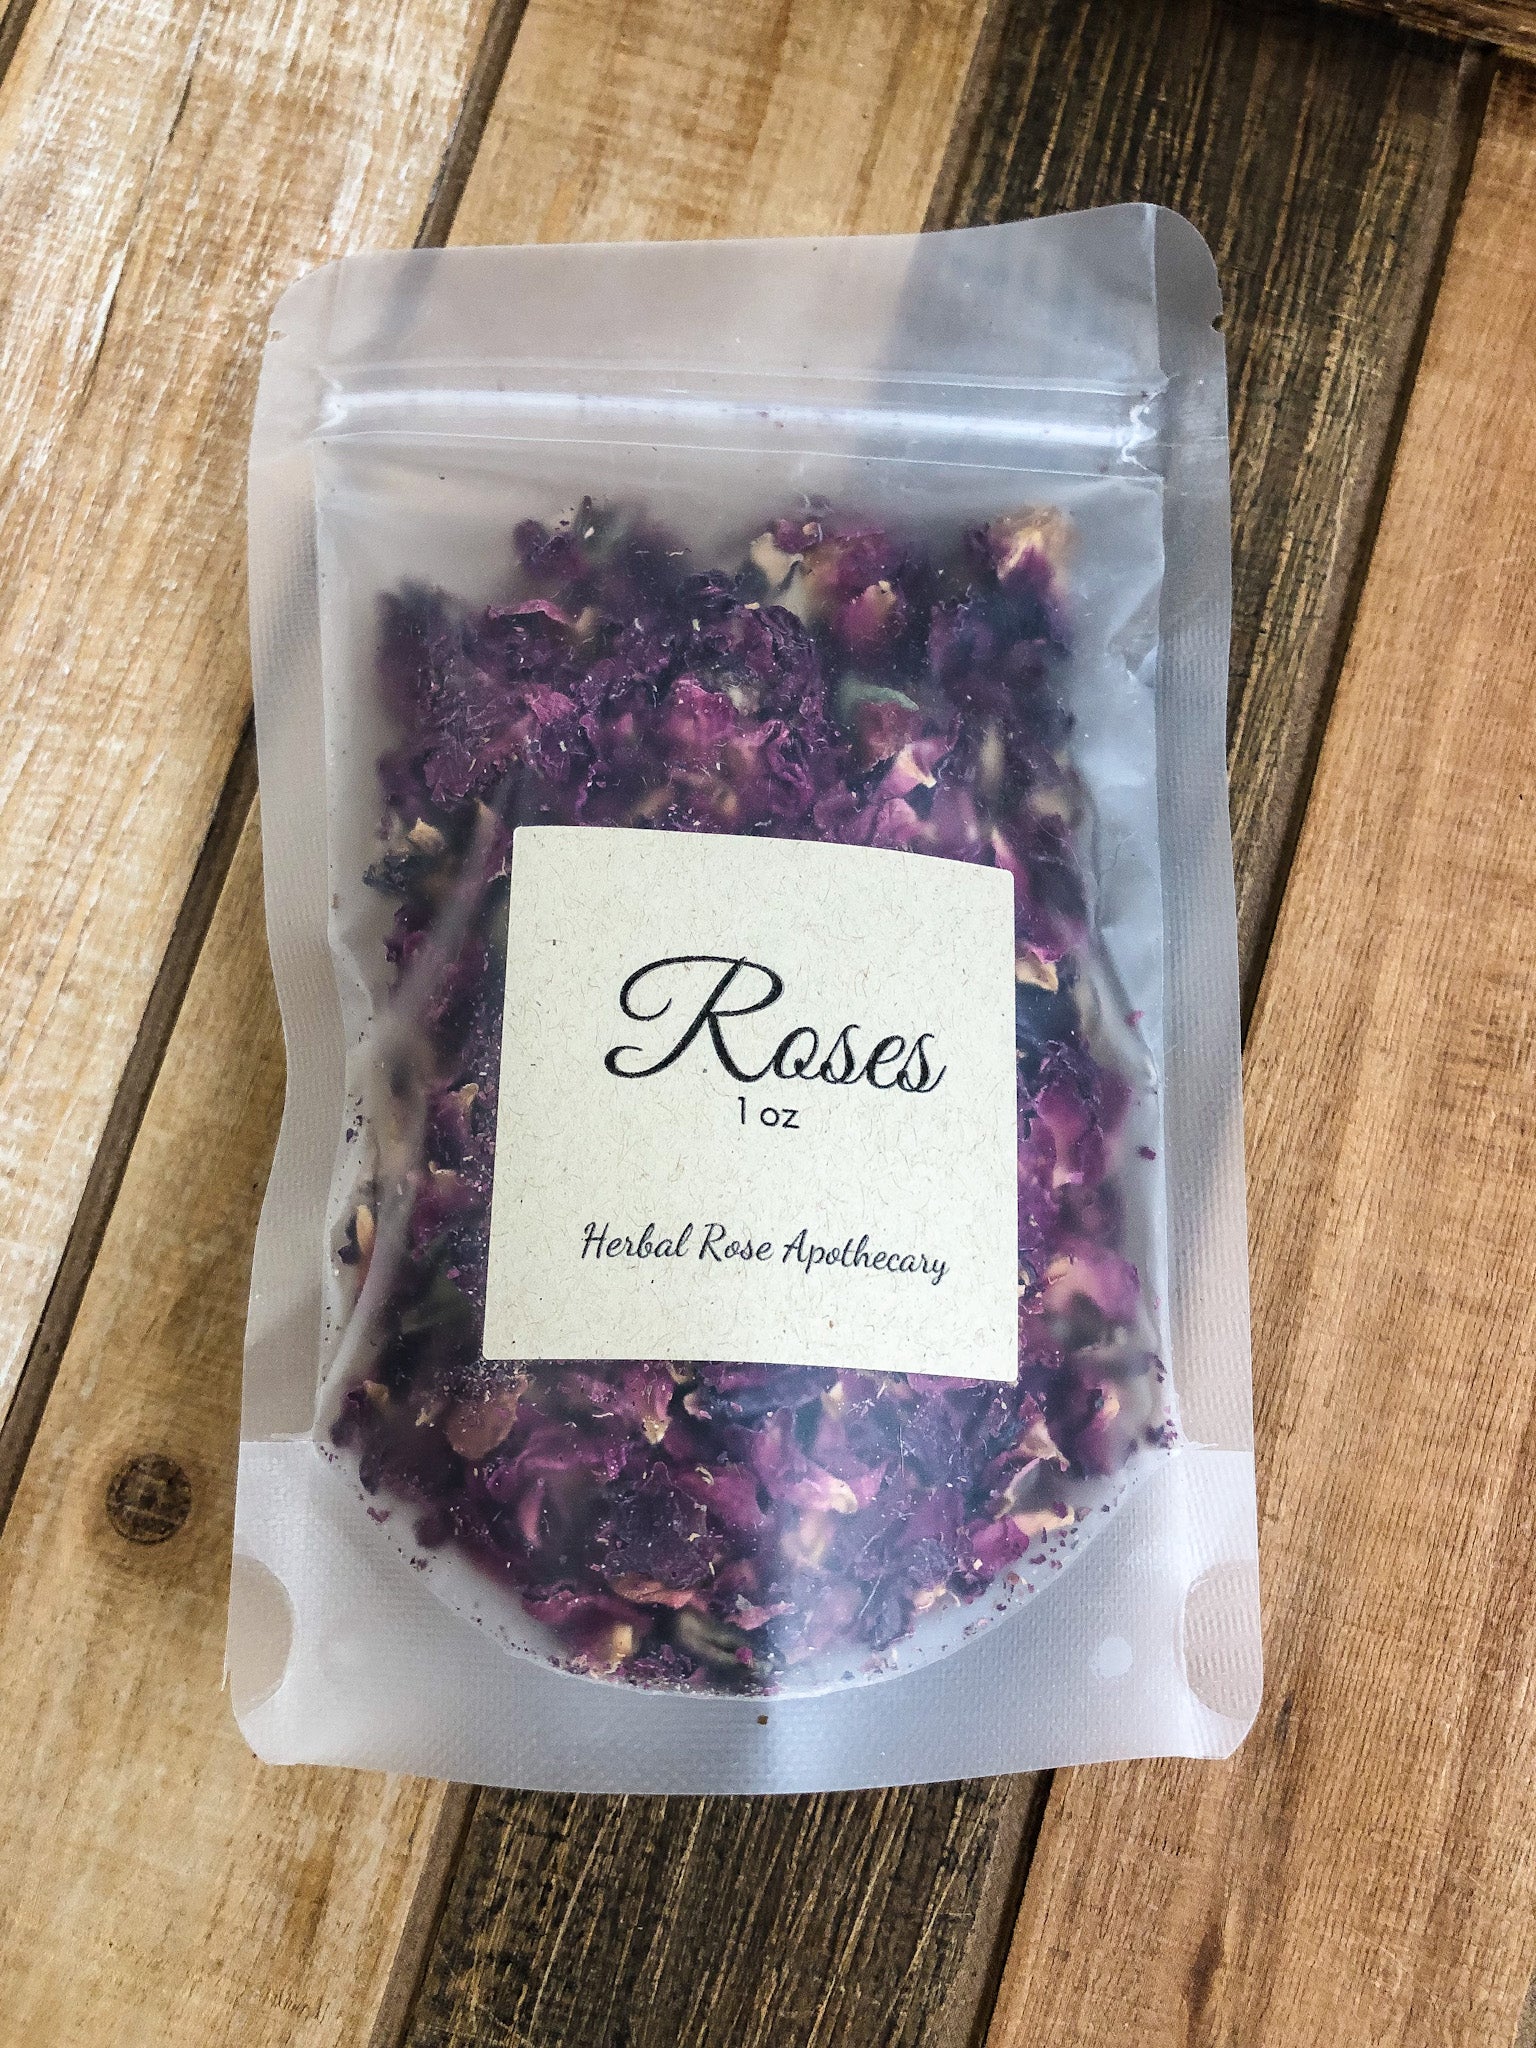 1oz bag of dried roses in a clear plastic bag on a wooden background